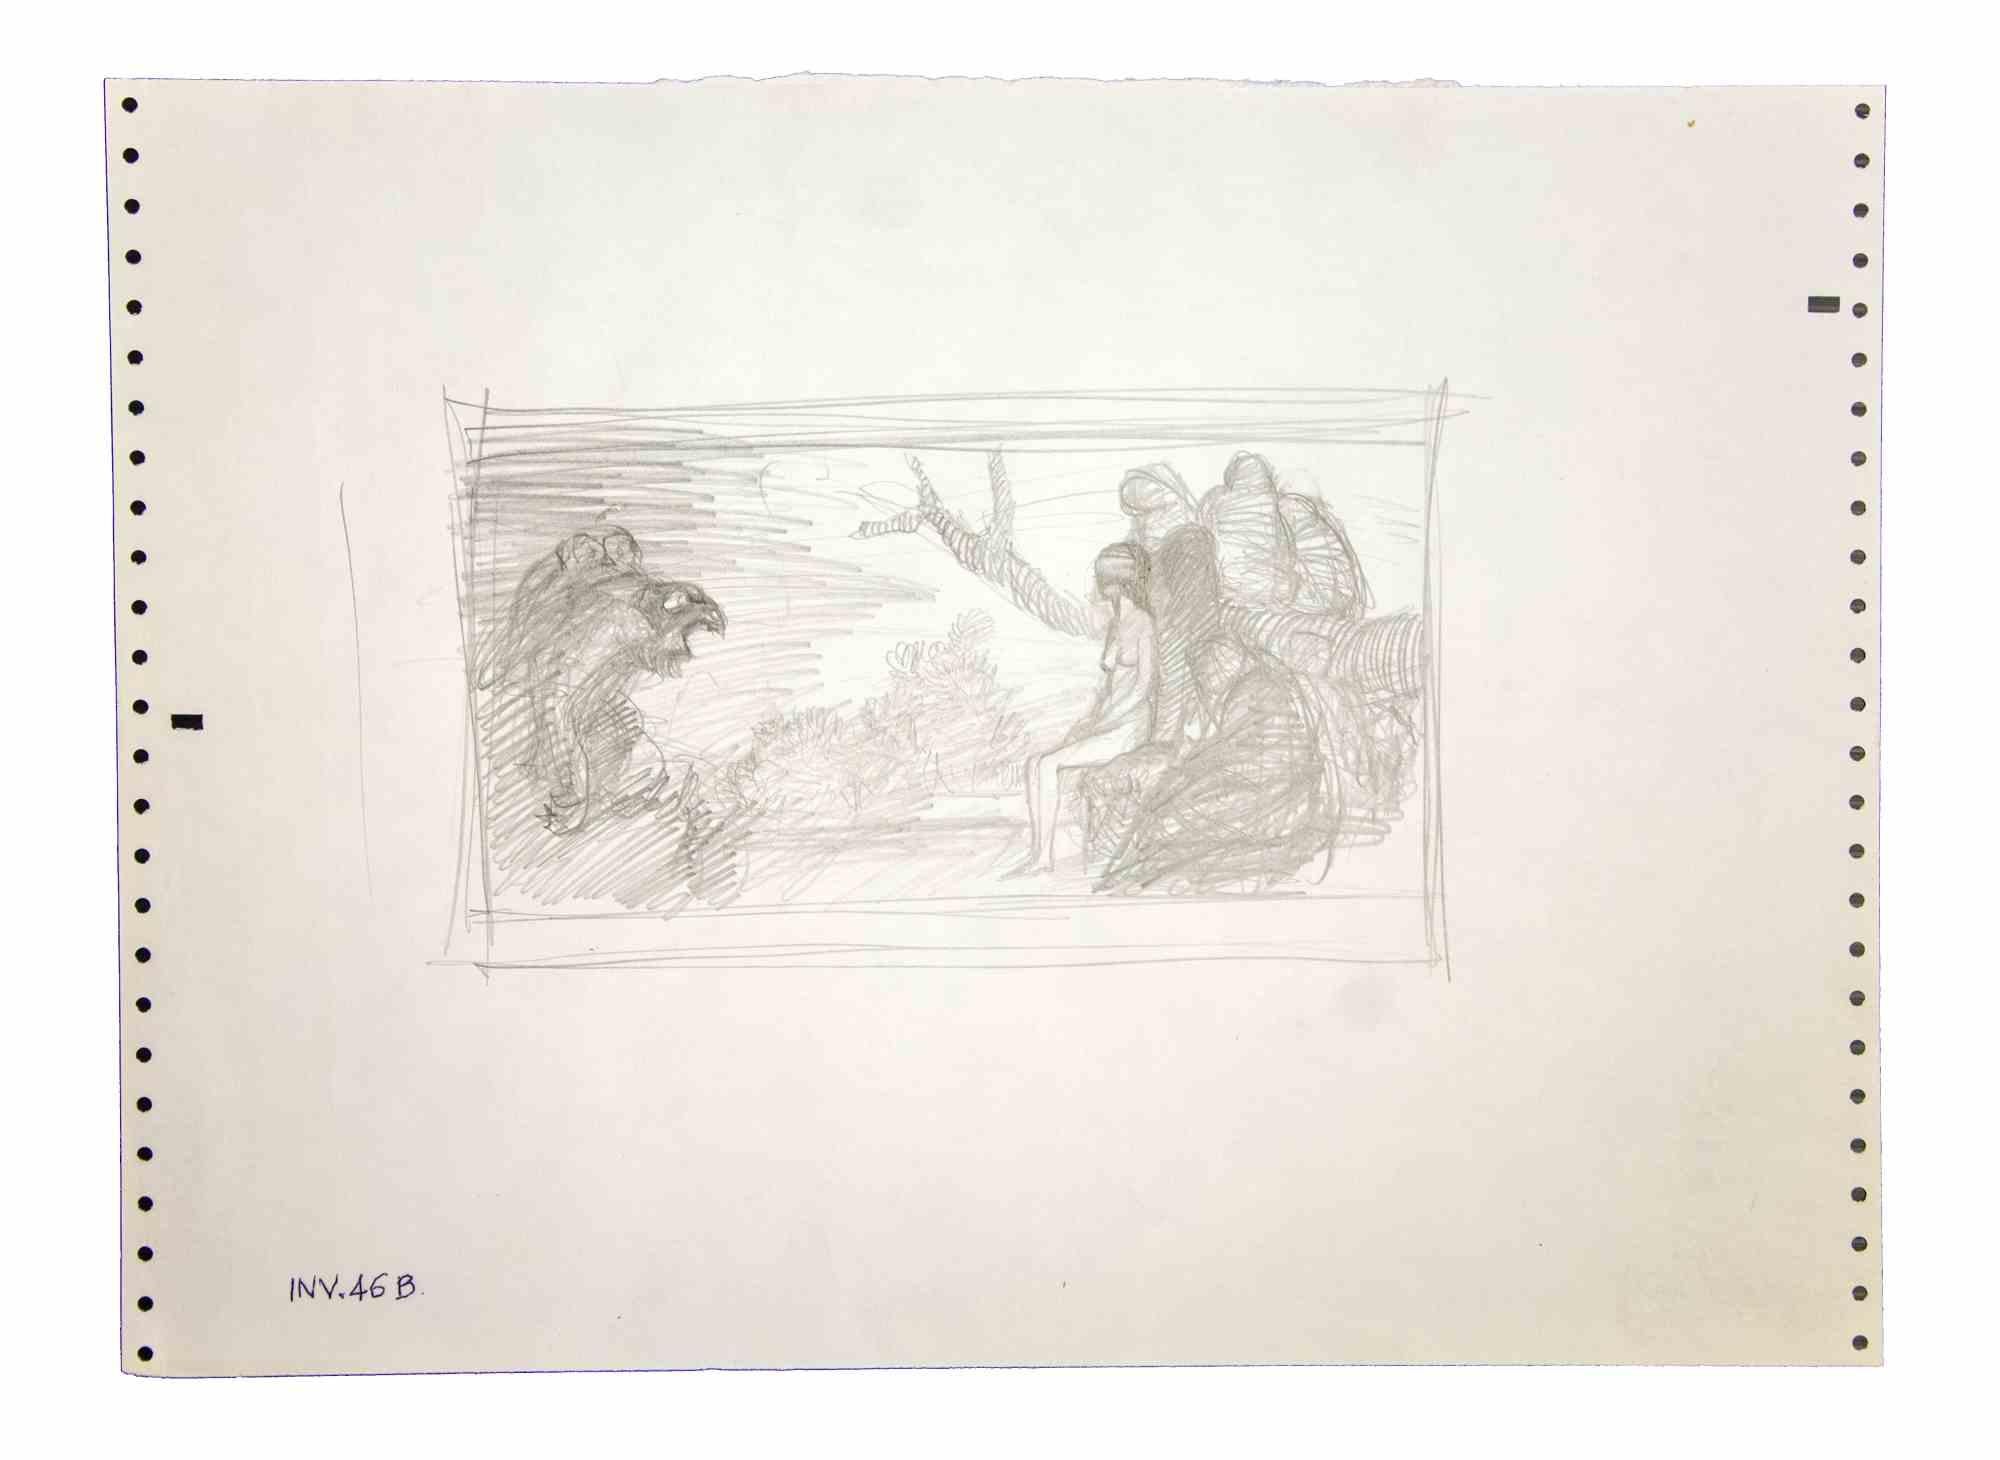 Sybil in the Forest is an original drawing in pencil on paper realized by Leo Guida in the 1970s.

Good condition.

Leo Guida  (1992 - 2017). Sensitive to current issues, artistic movements and historical techniques, Leo Guida has been able to weave